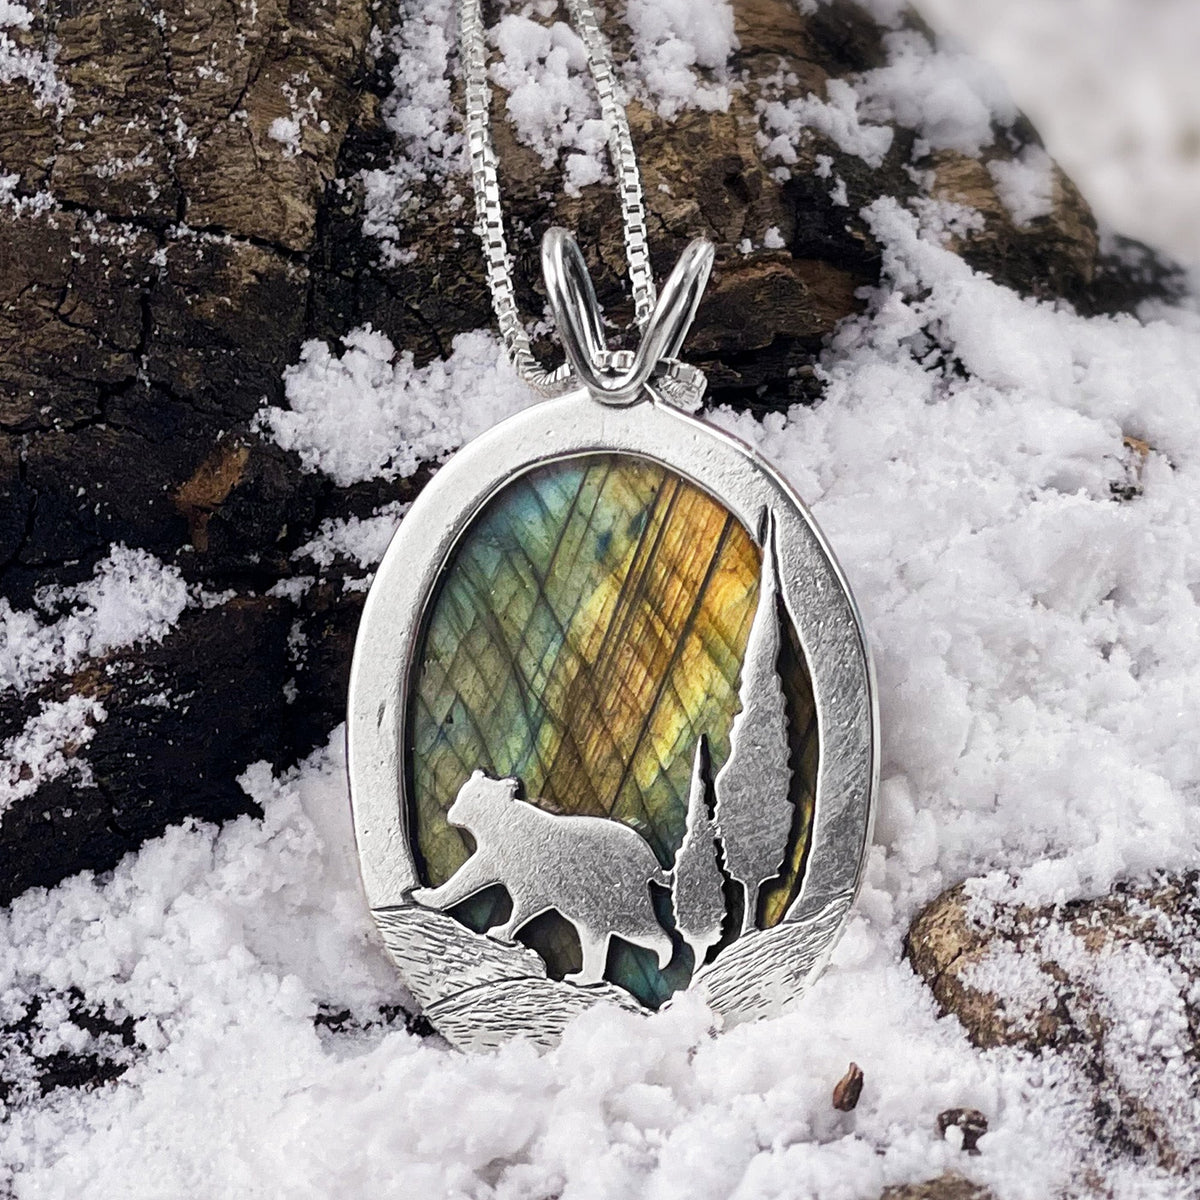 Choose Your Own Reversible Northern Lights Labradorite Bear Pendant - Silver Pendant Stone A - 32 x 21mm Stone B - 33 x 22mm 7136 - handmade by Beth Millner Jewelry